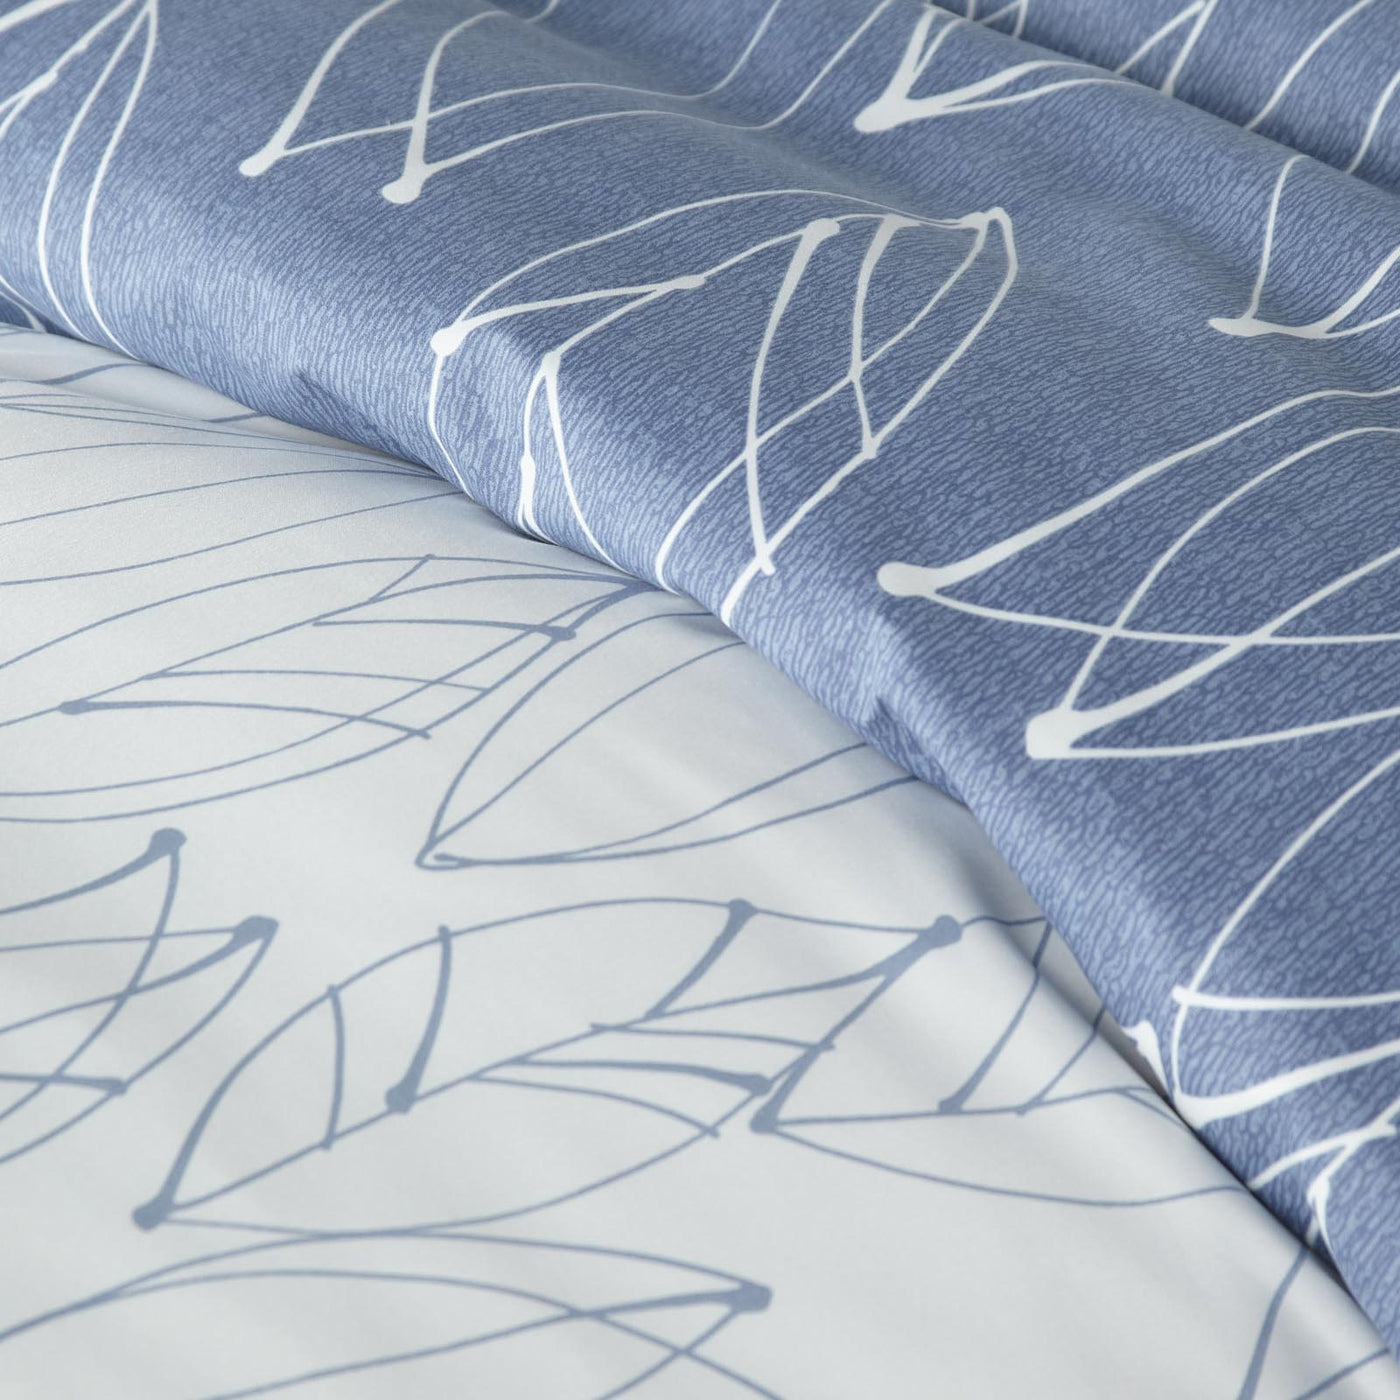 Contemporary Leaves Duvet Cover Set in Blue